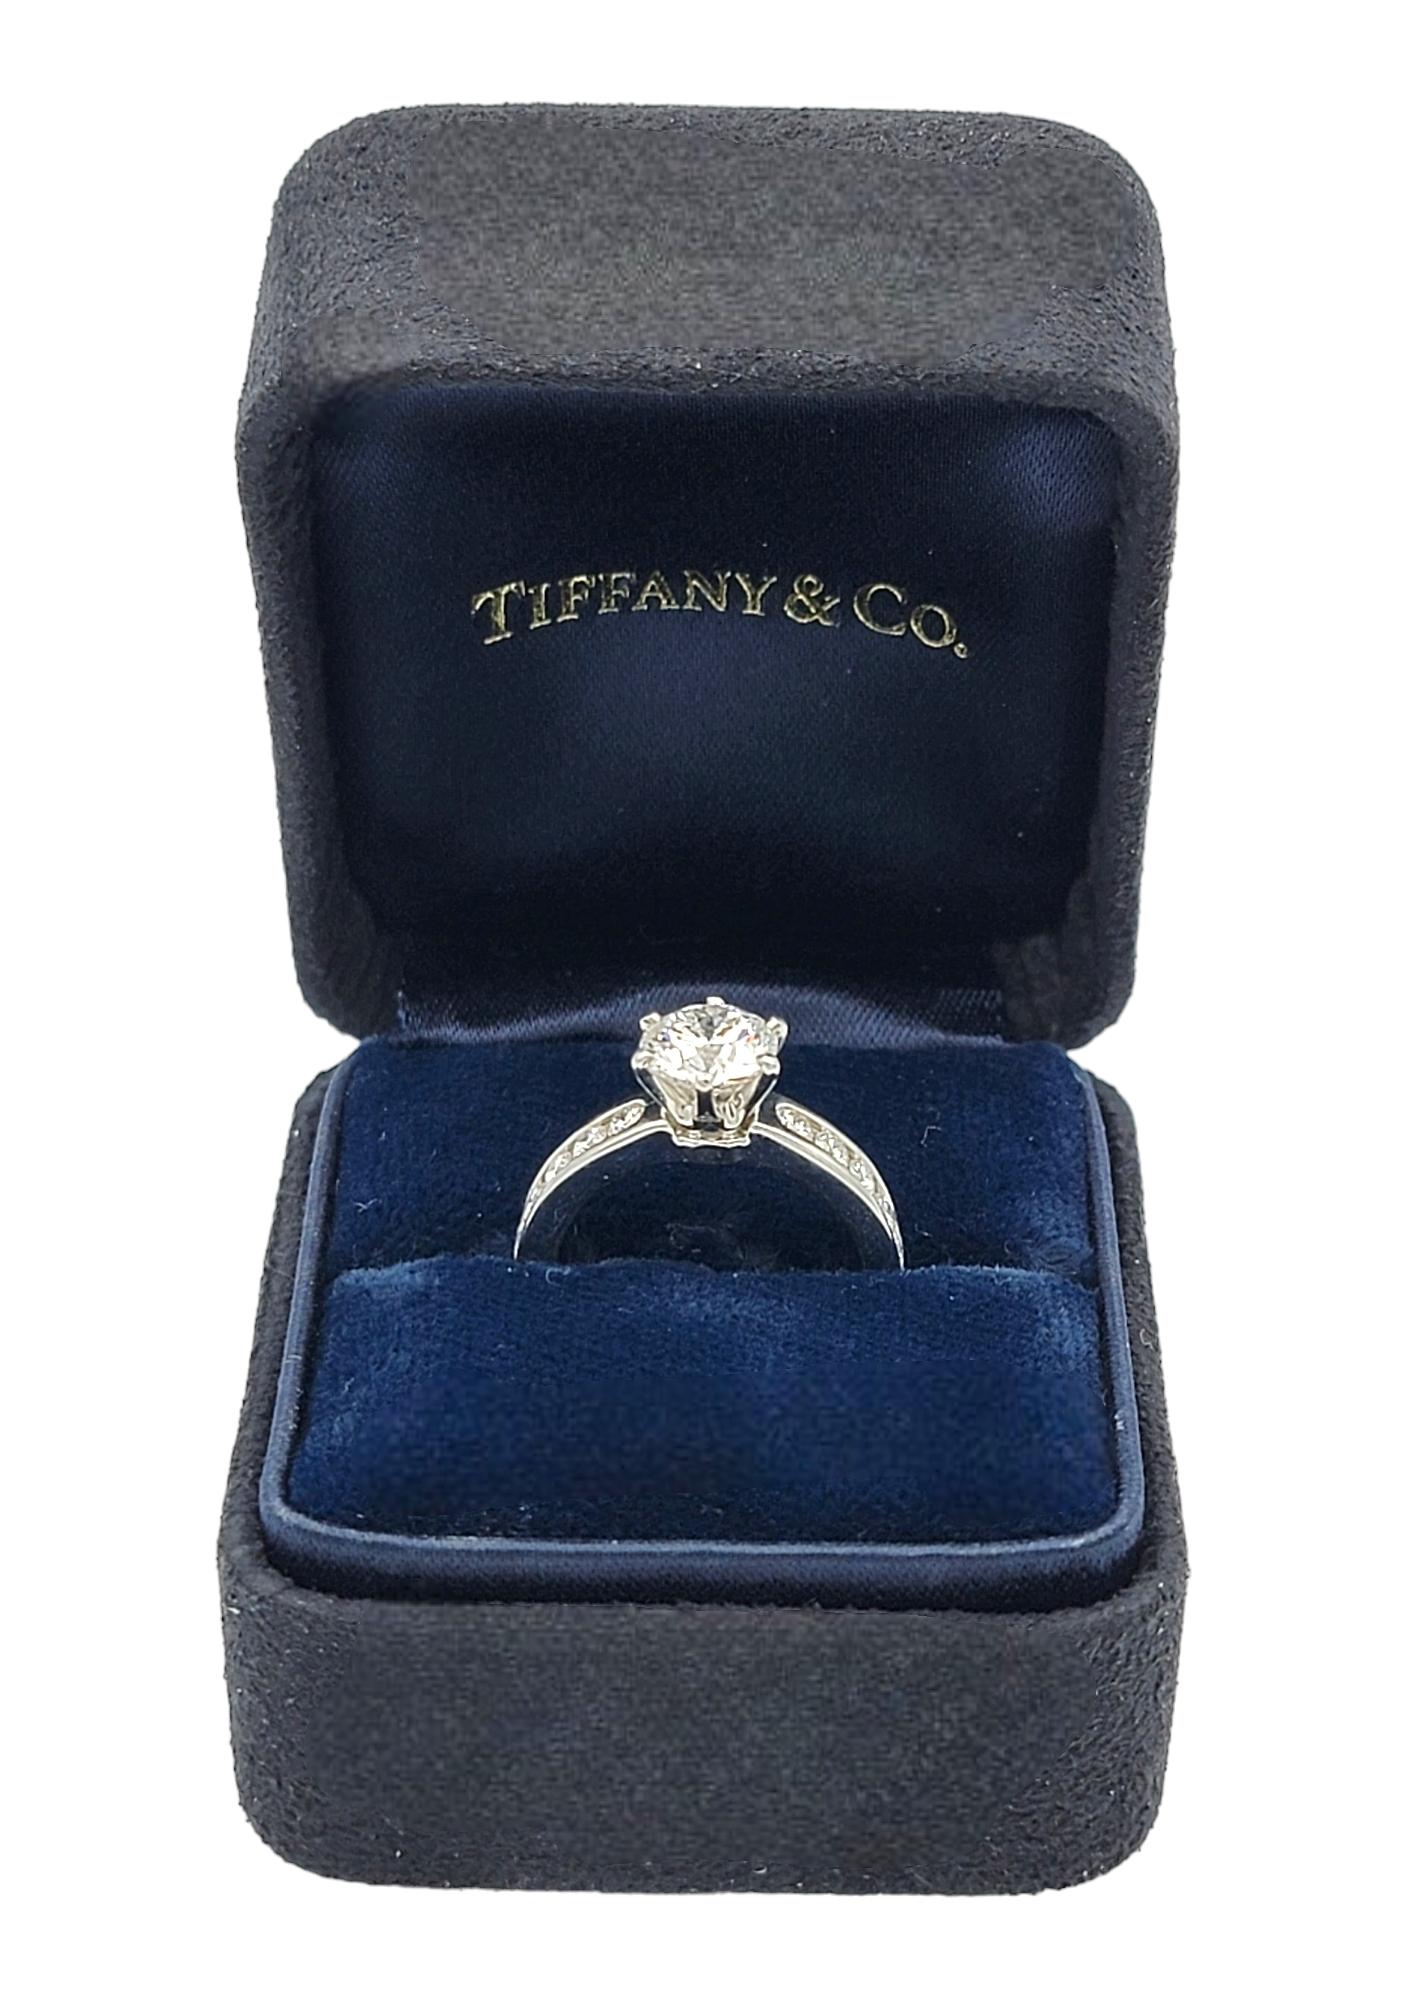 Ring Size: 4

This Tiffany & Co. platinum engagement ring exudes timeless elegance with its simple yet exquisite design. The centerpiece of this ring is a stunning 1.07-carat diamond, which captivates the onlooker with its brilliant luster. Graded